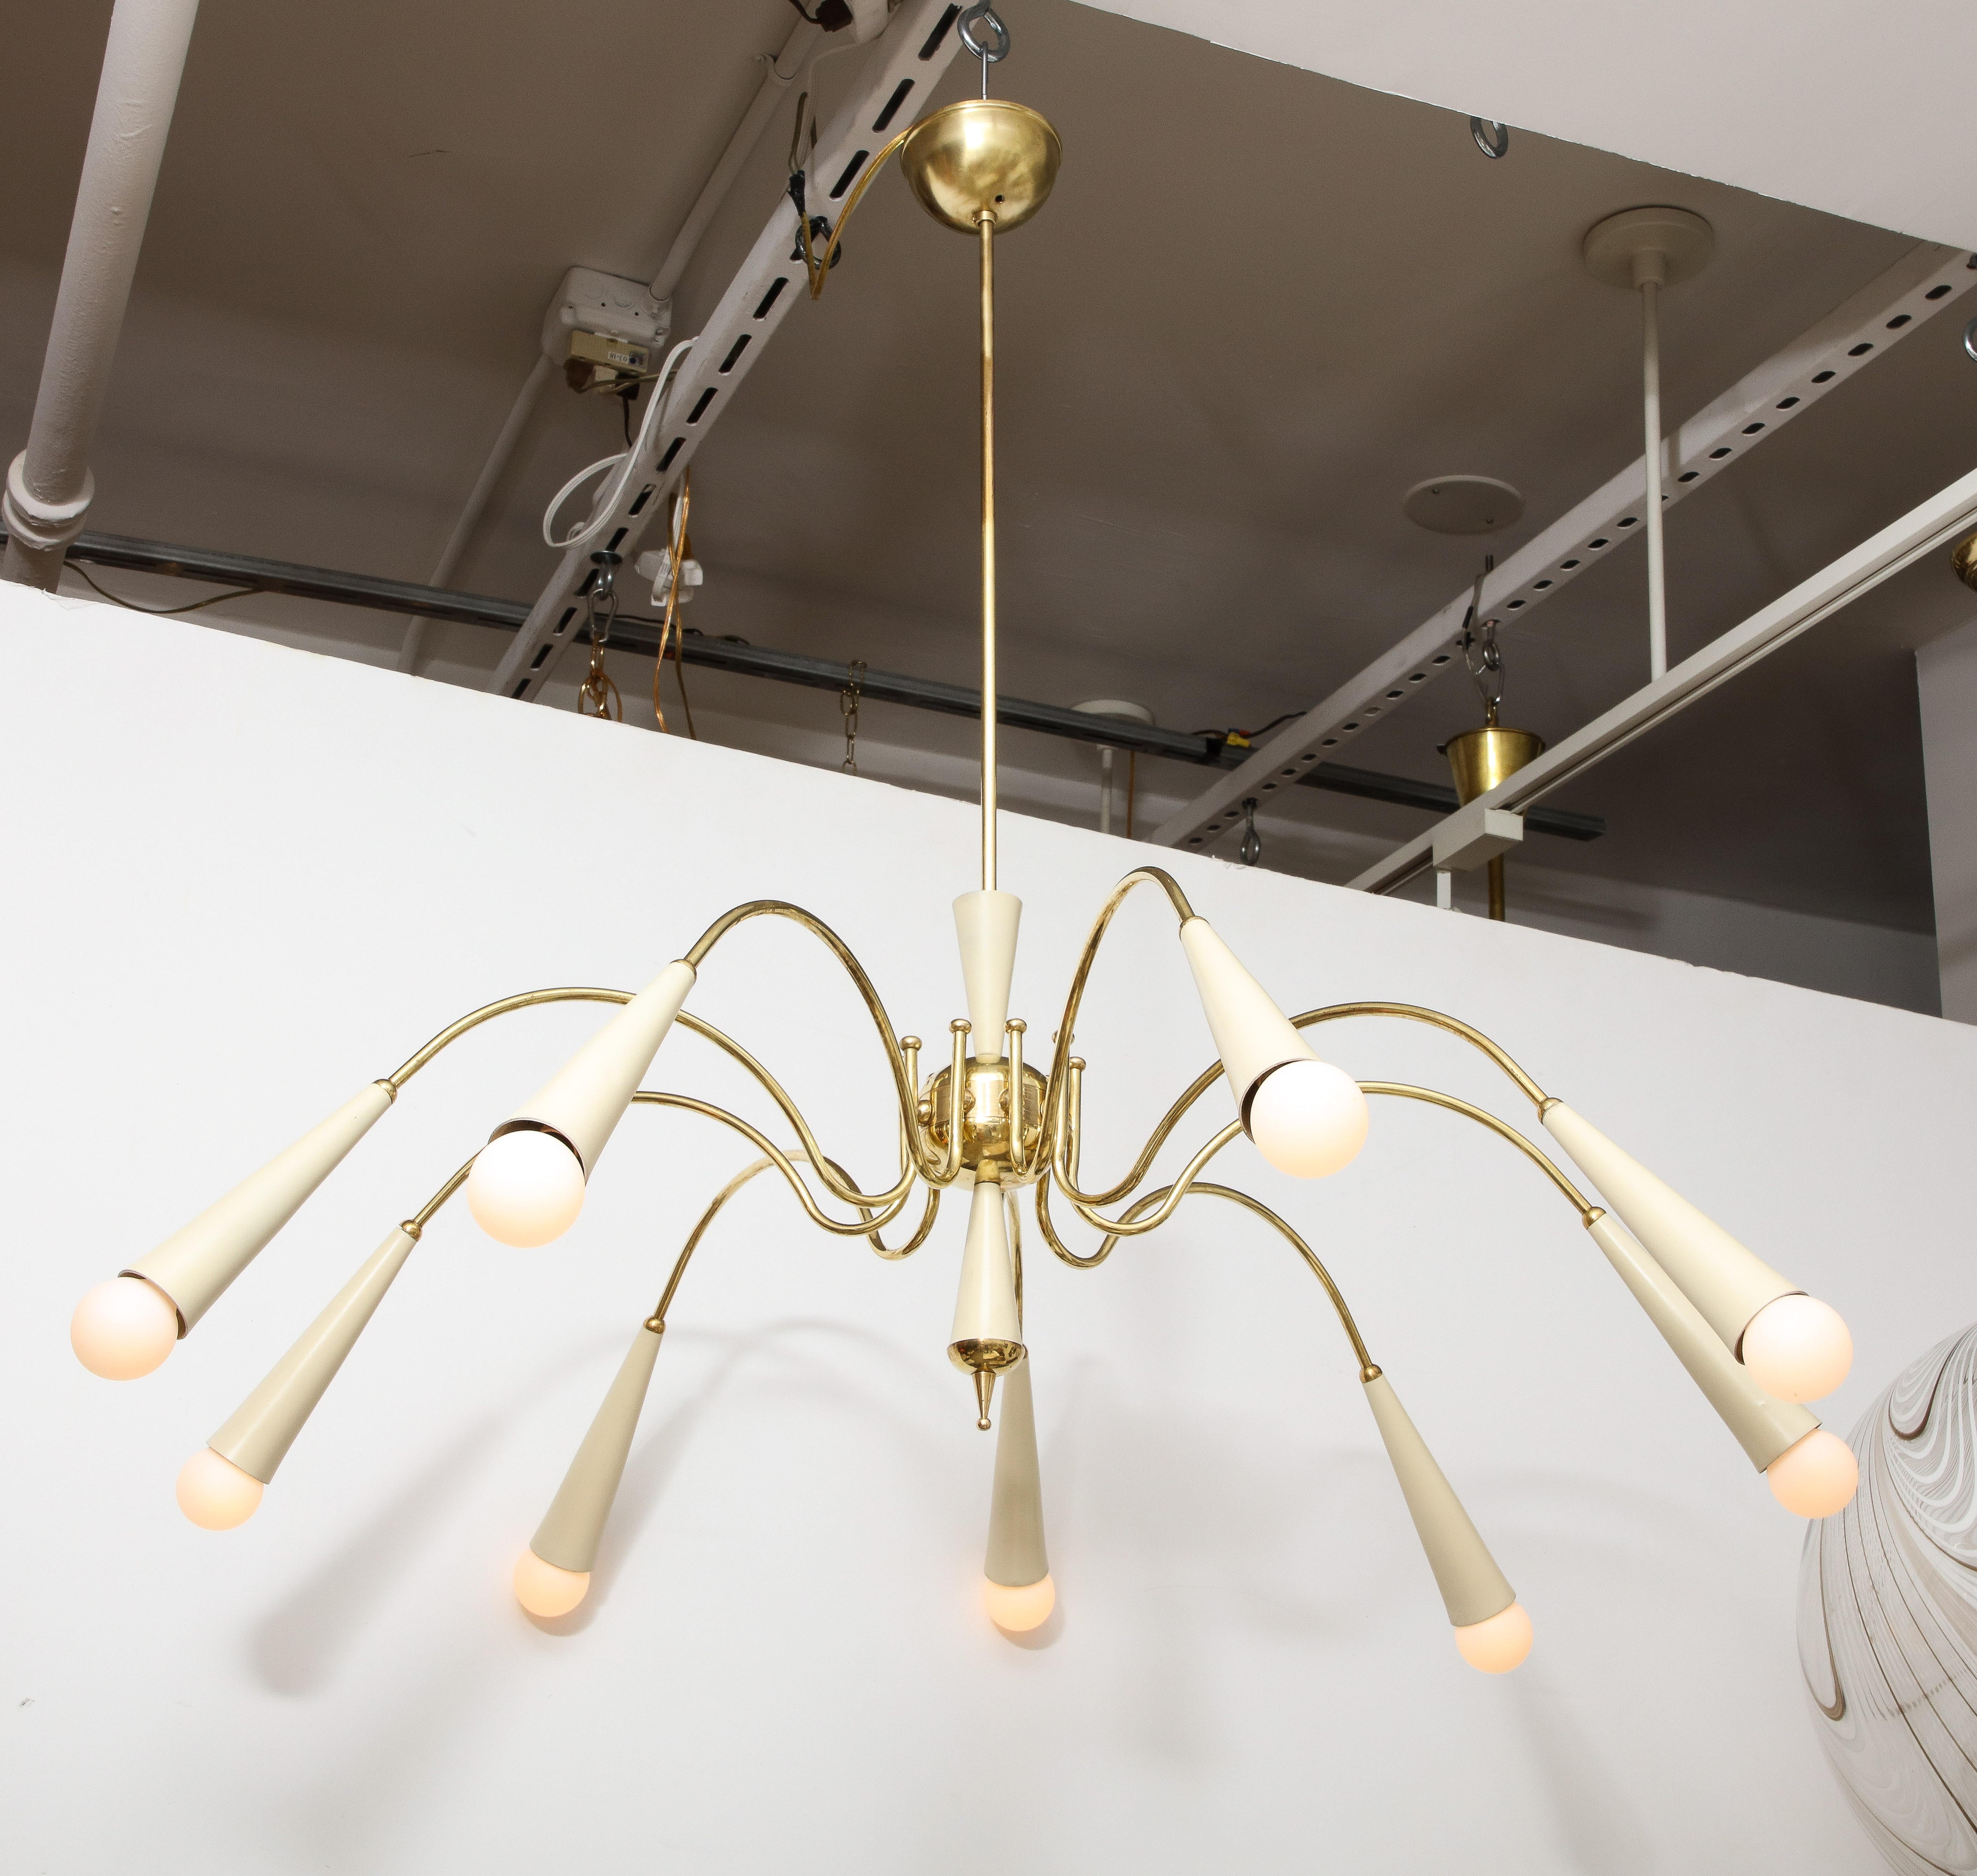 Italian Modernist Brass Spider Chandelier, Italy, circa 1950 In Good Condition For Sale In New York, NY